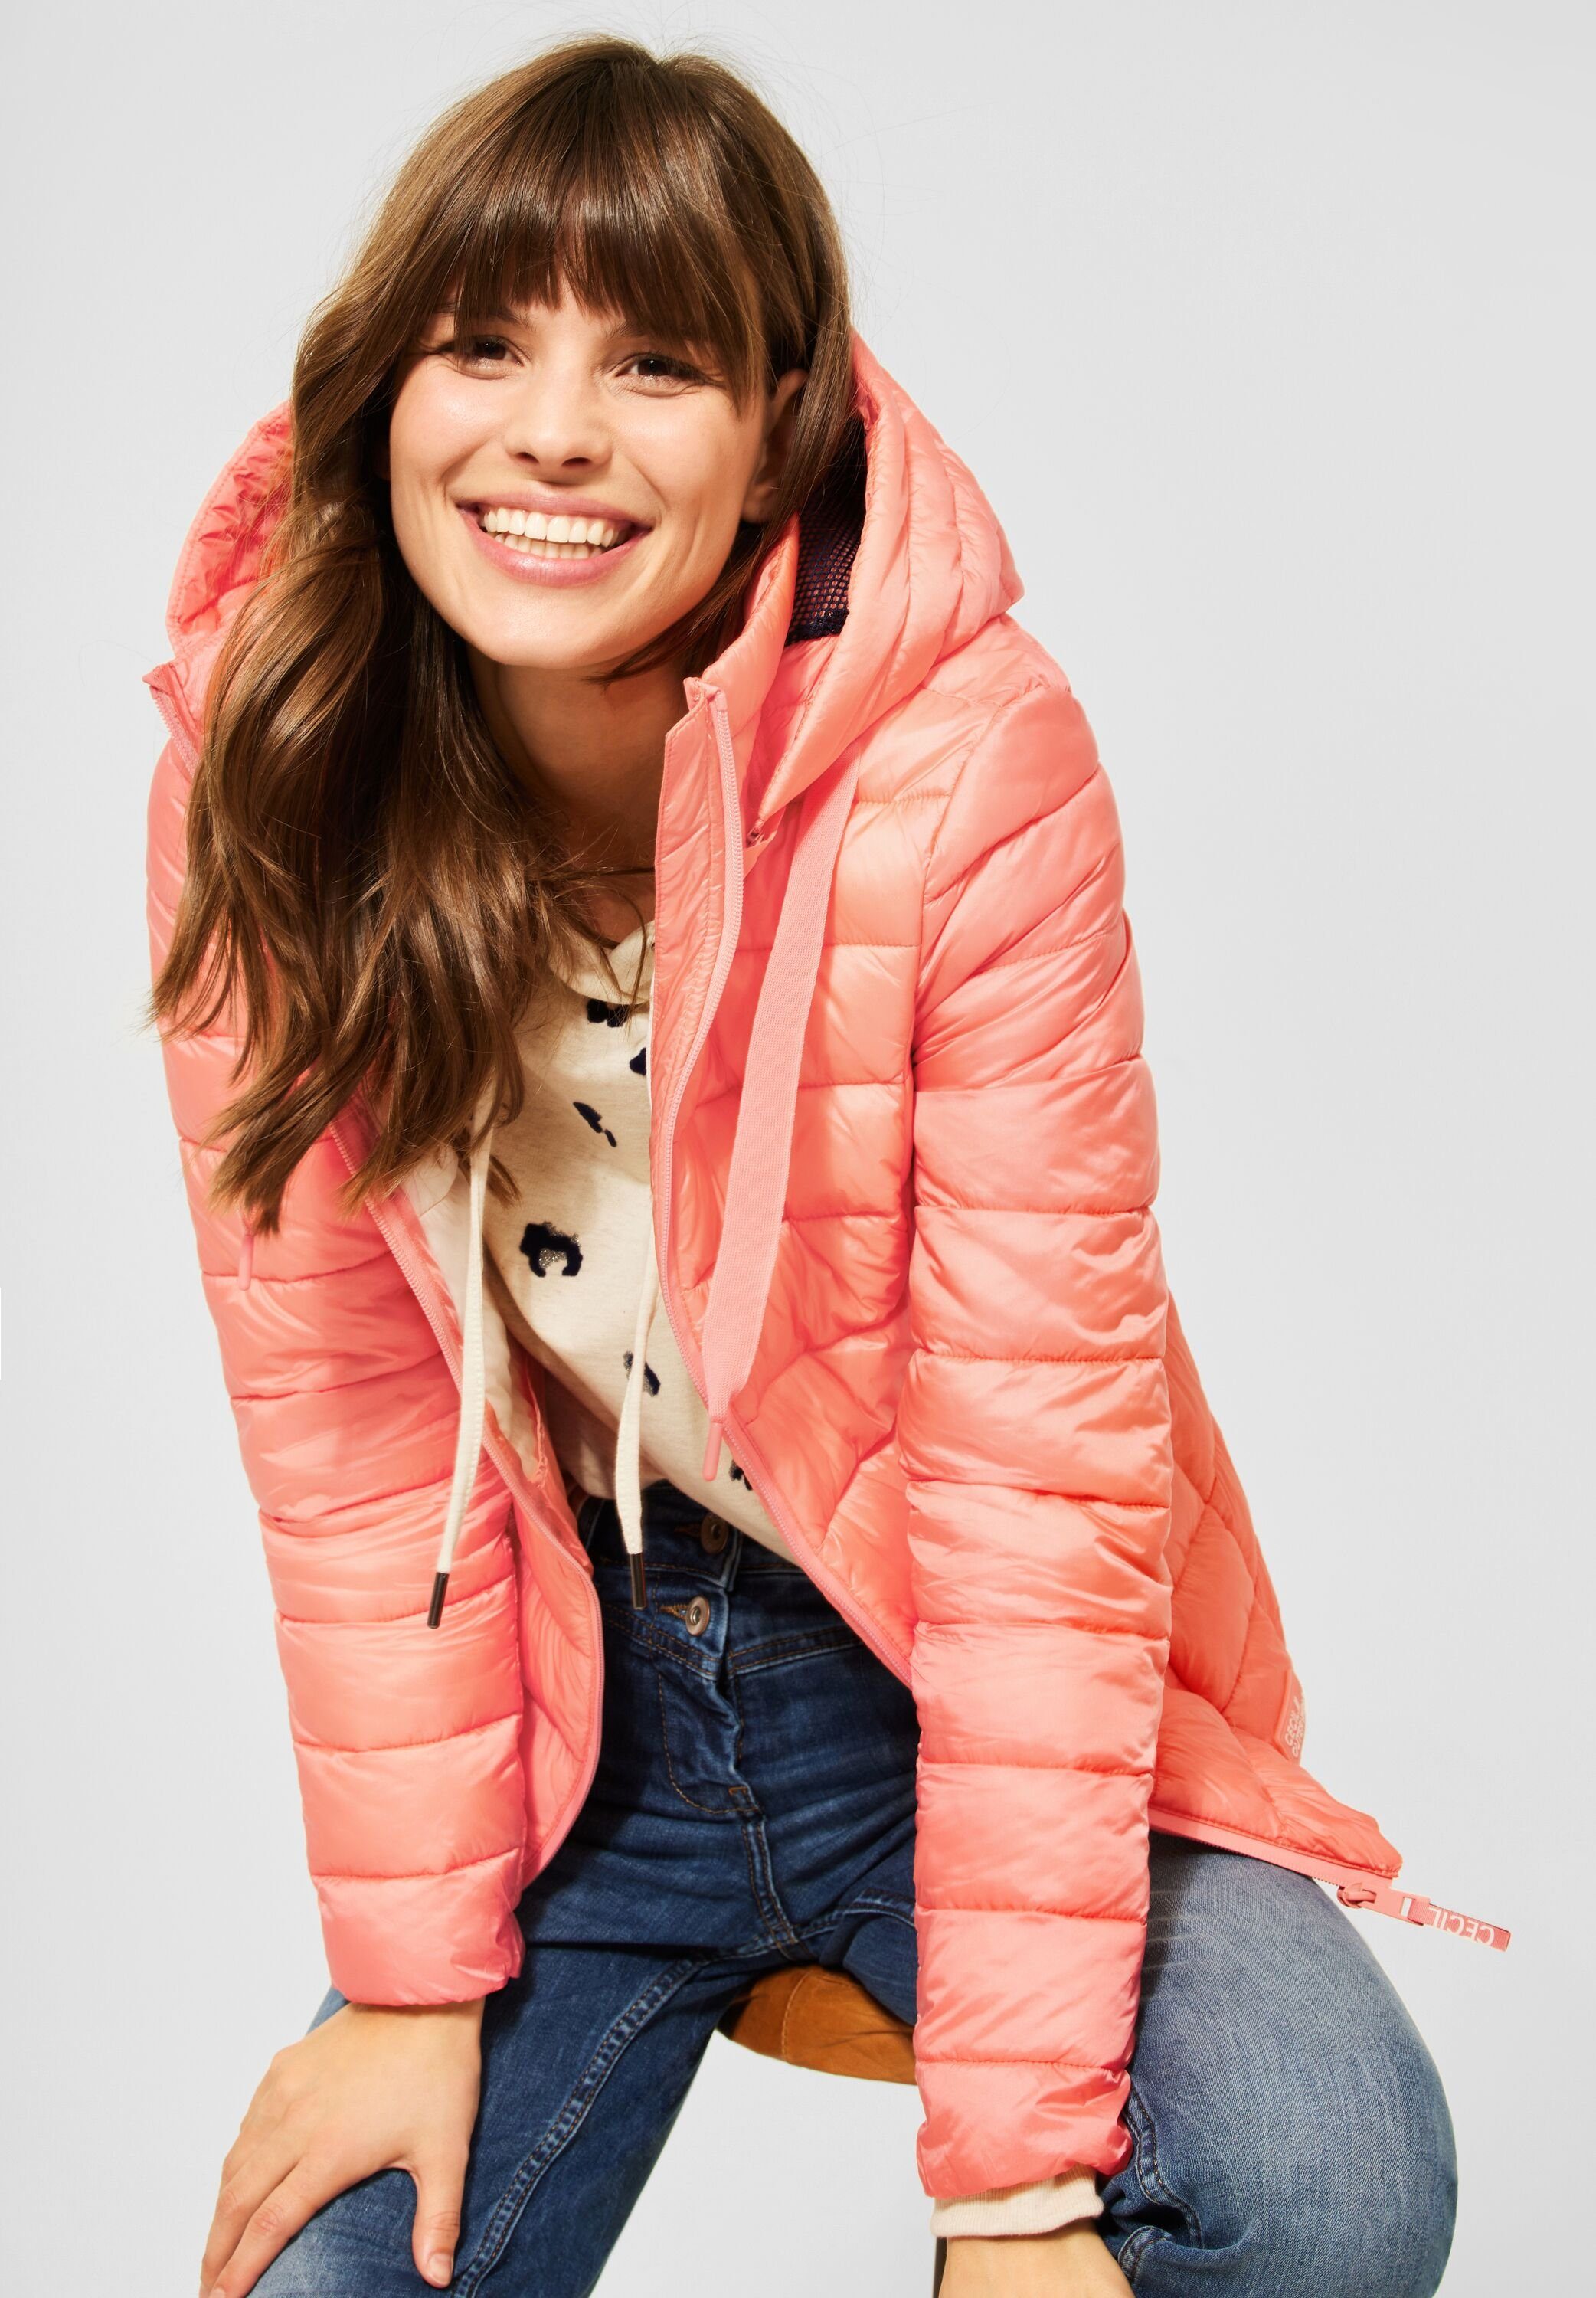 Material: (1-St) Obermaterial Nylon, Futter Jacke Taschen, 100% Nylon, Rose Gesteppte Outdoorjacke in 100% Cecil Futter Grapefruit Cecil Polyester 100% Outdoor